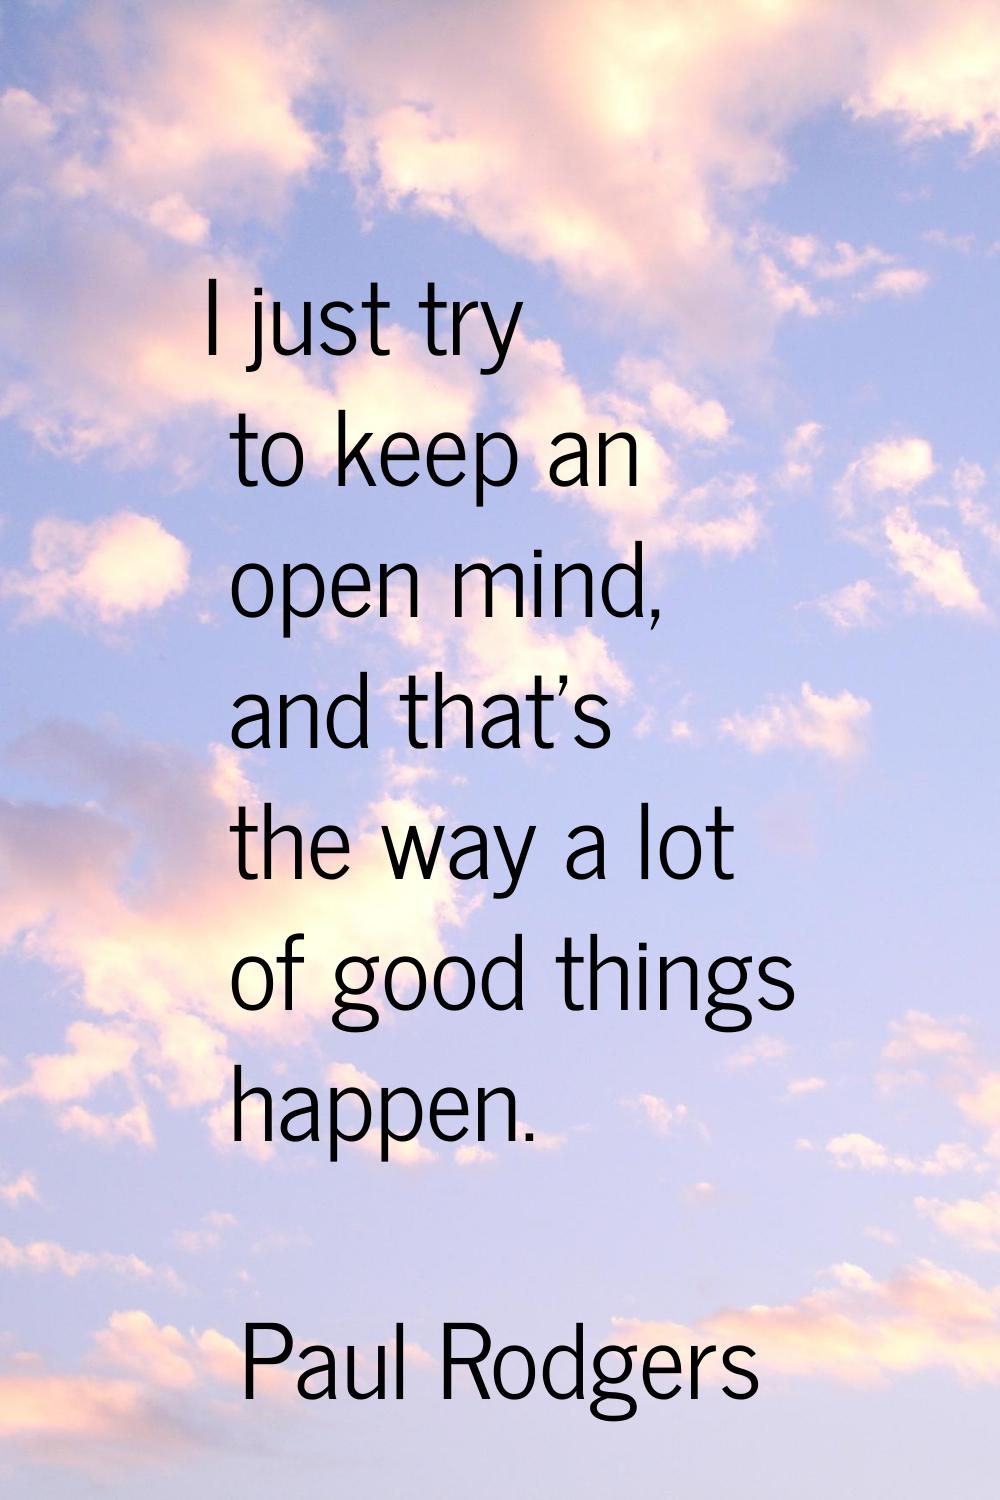 I just try to keep an open mind, and that's the way a lot of good things happen.